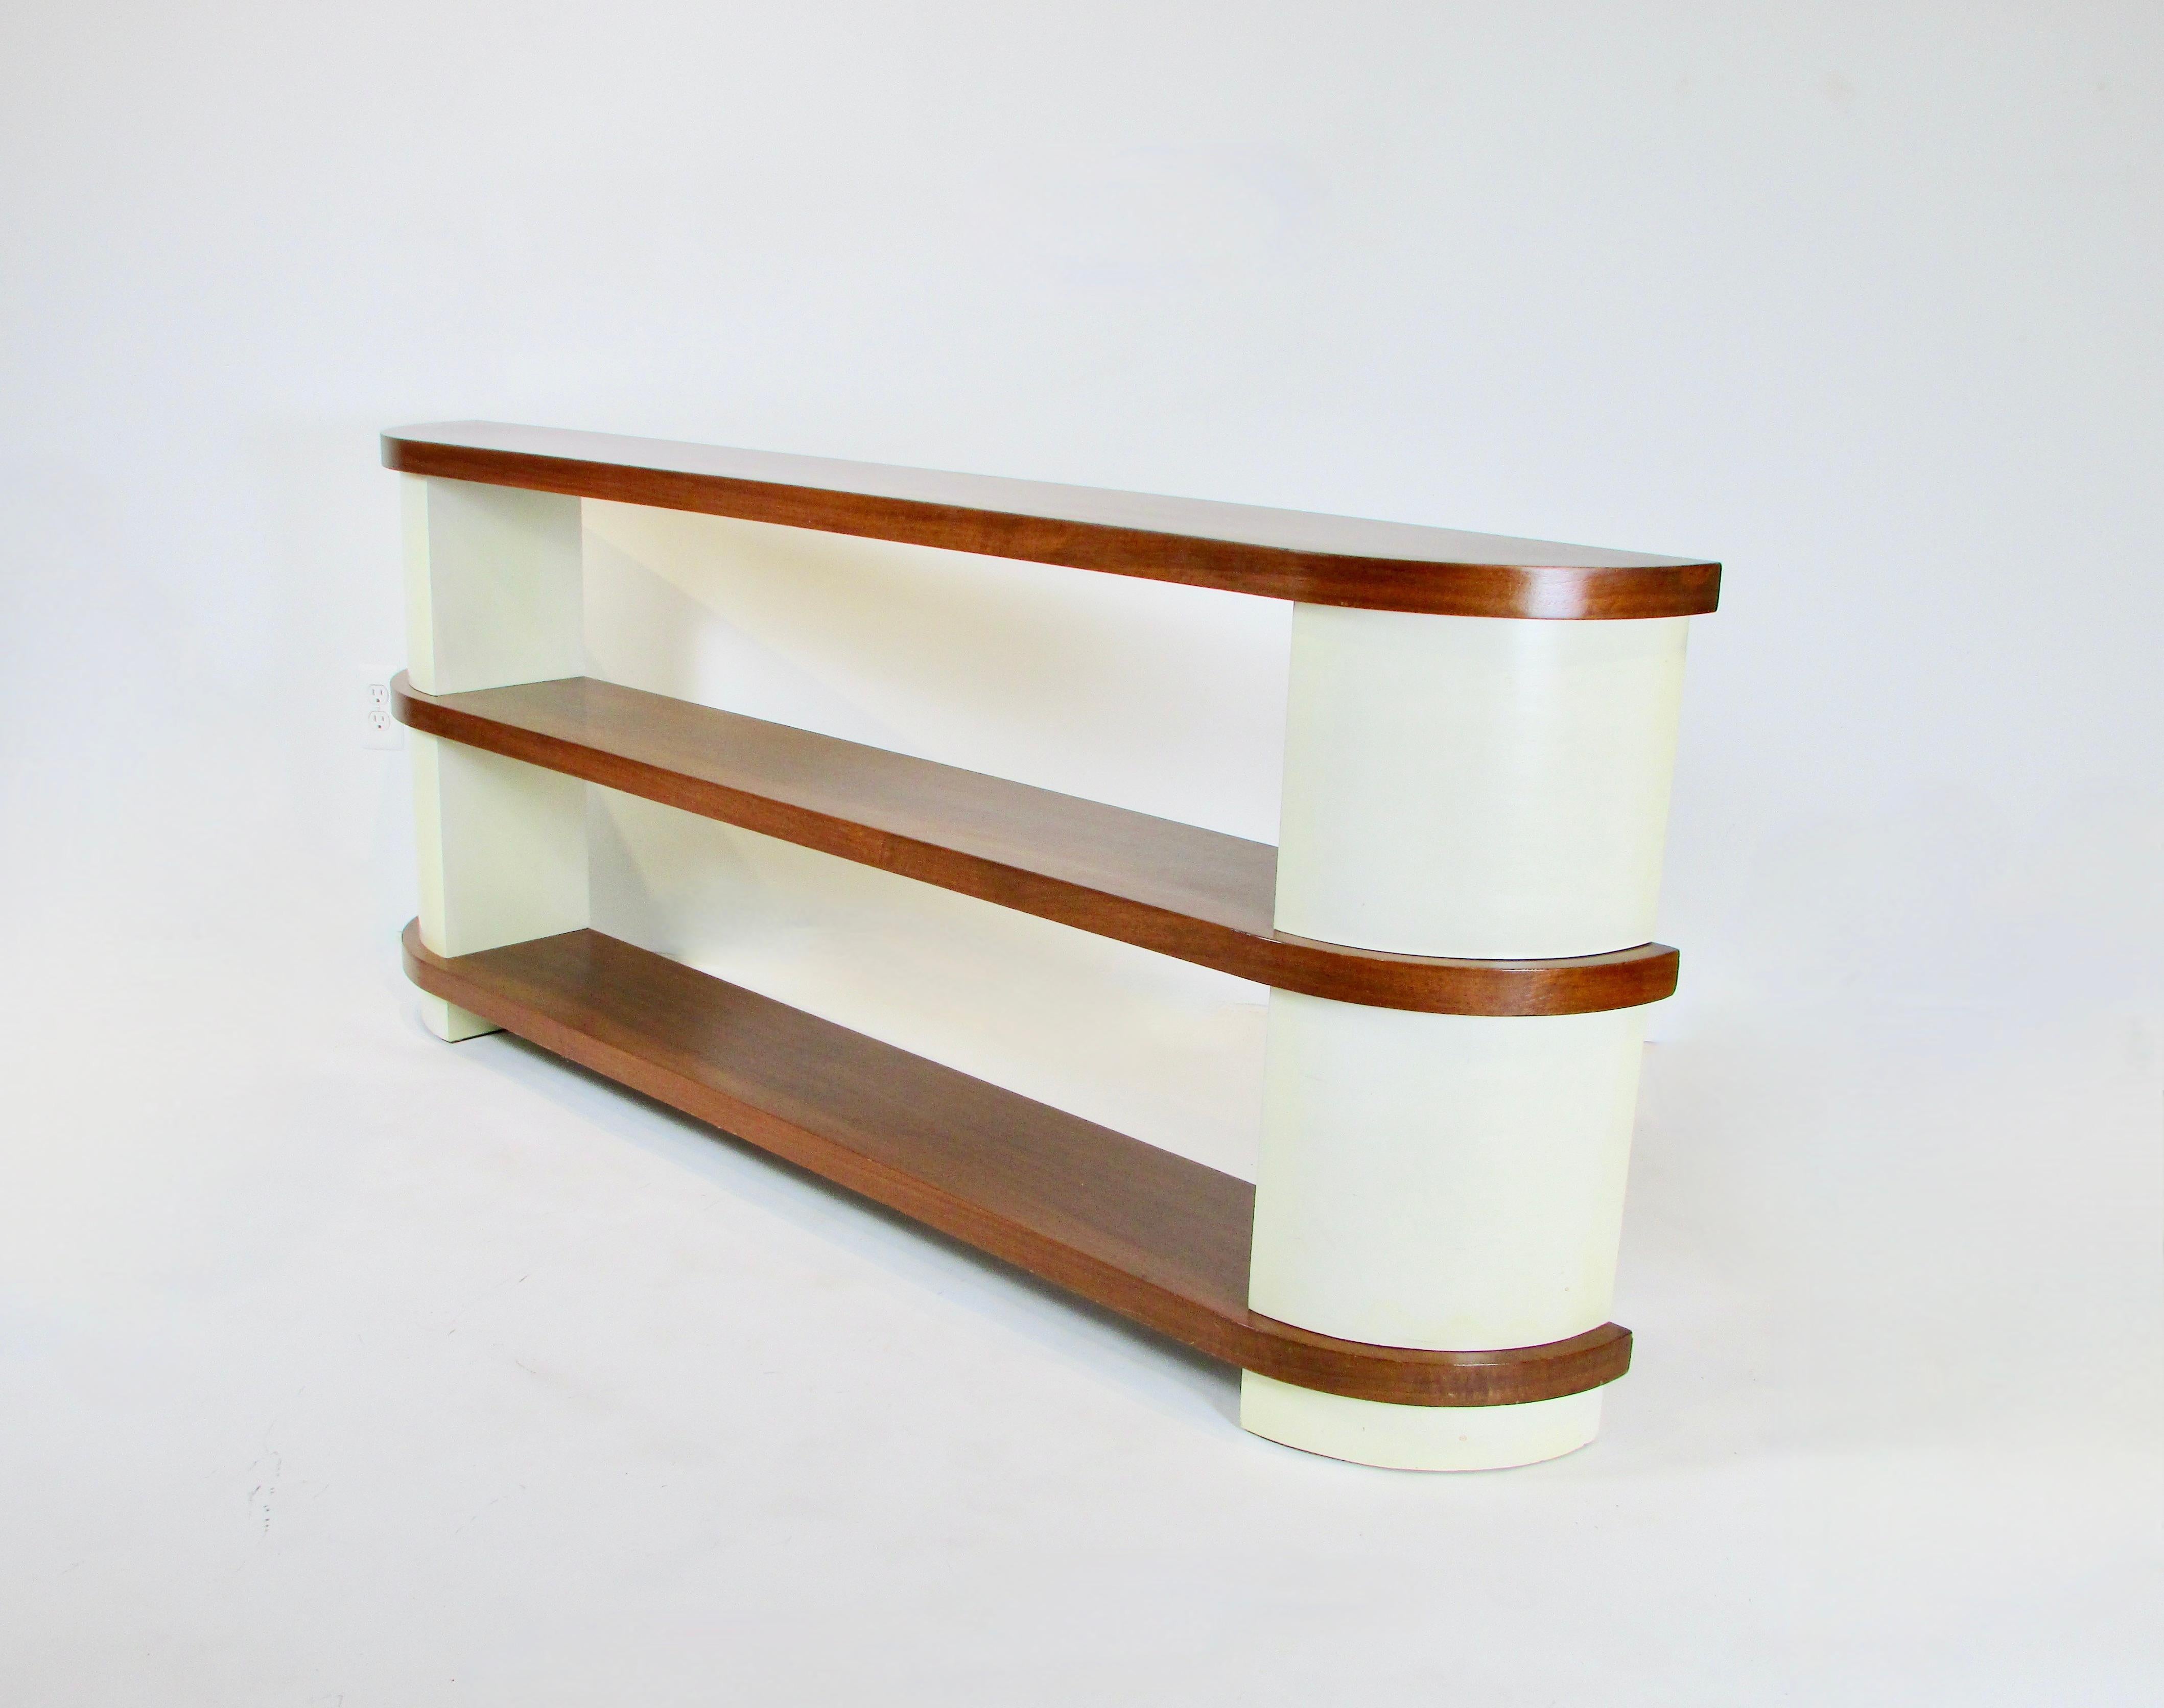 Lacquered Donald Deskey Attributed Art Deco Streamlined Moderne Console Entry Shelf Unit For Sale